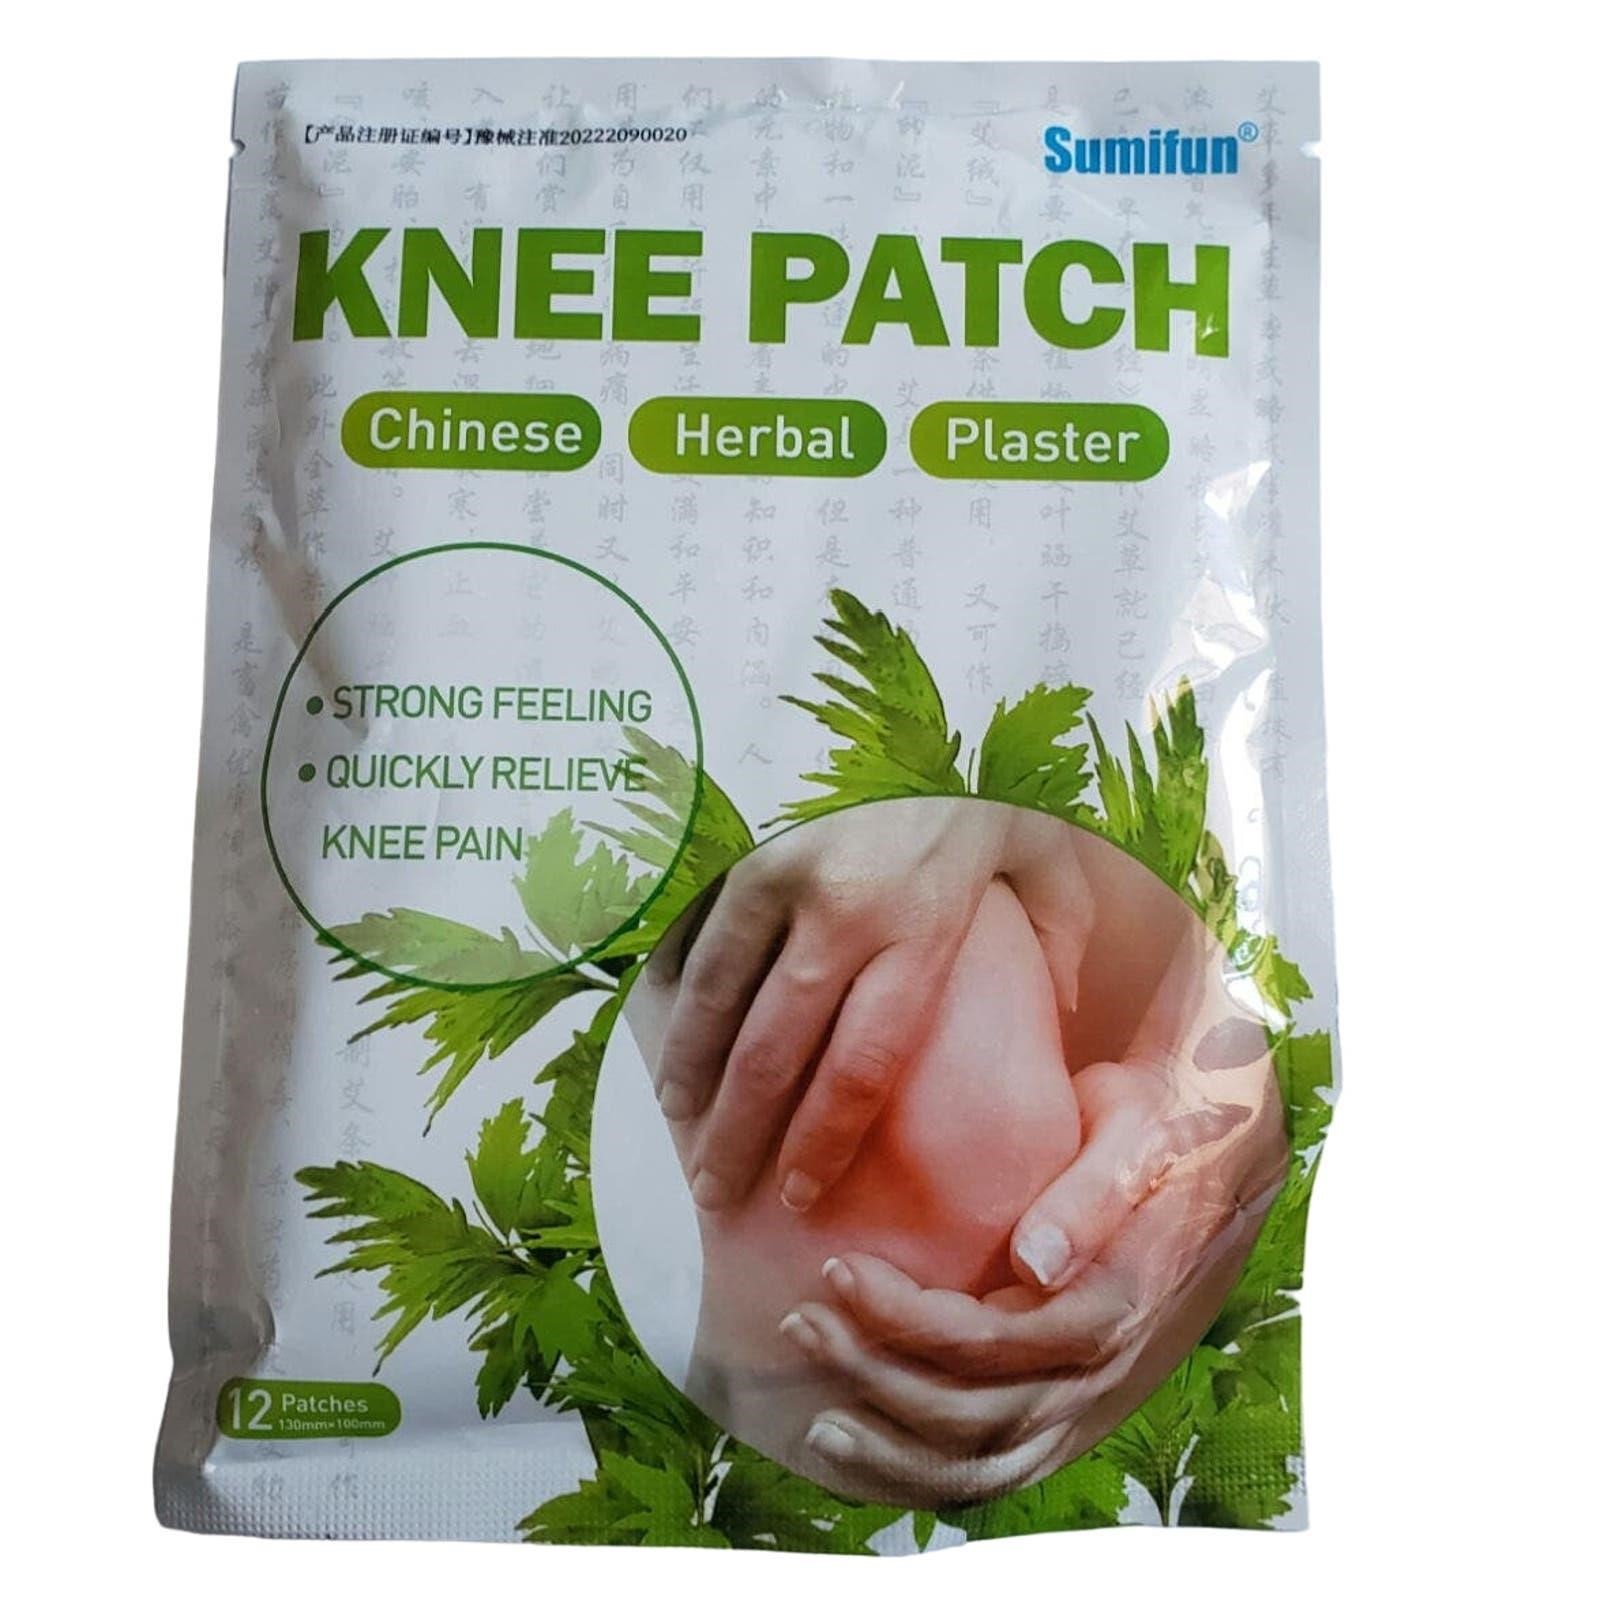 12 pk Knee Patch "Chinese Herbal Plaster"